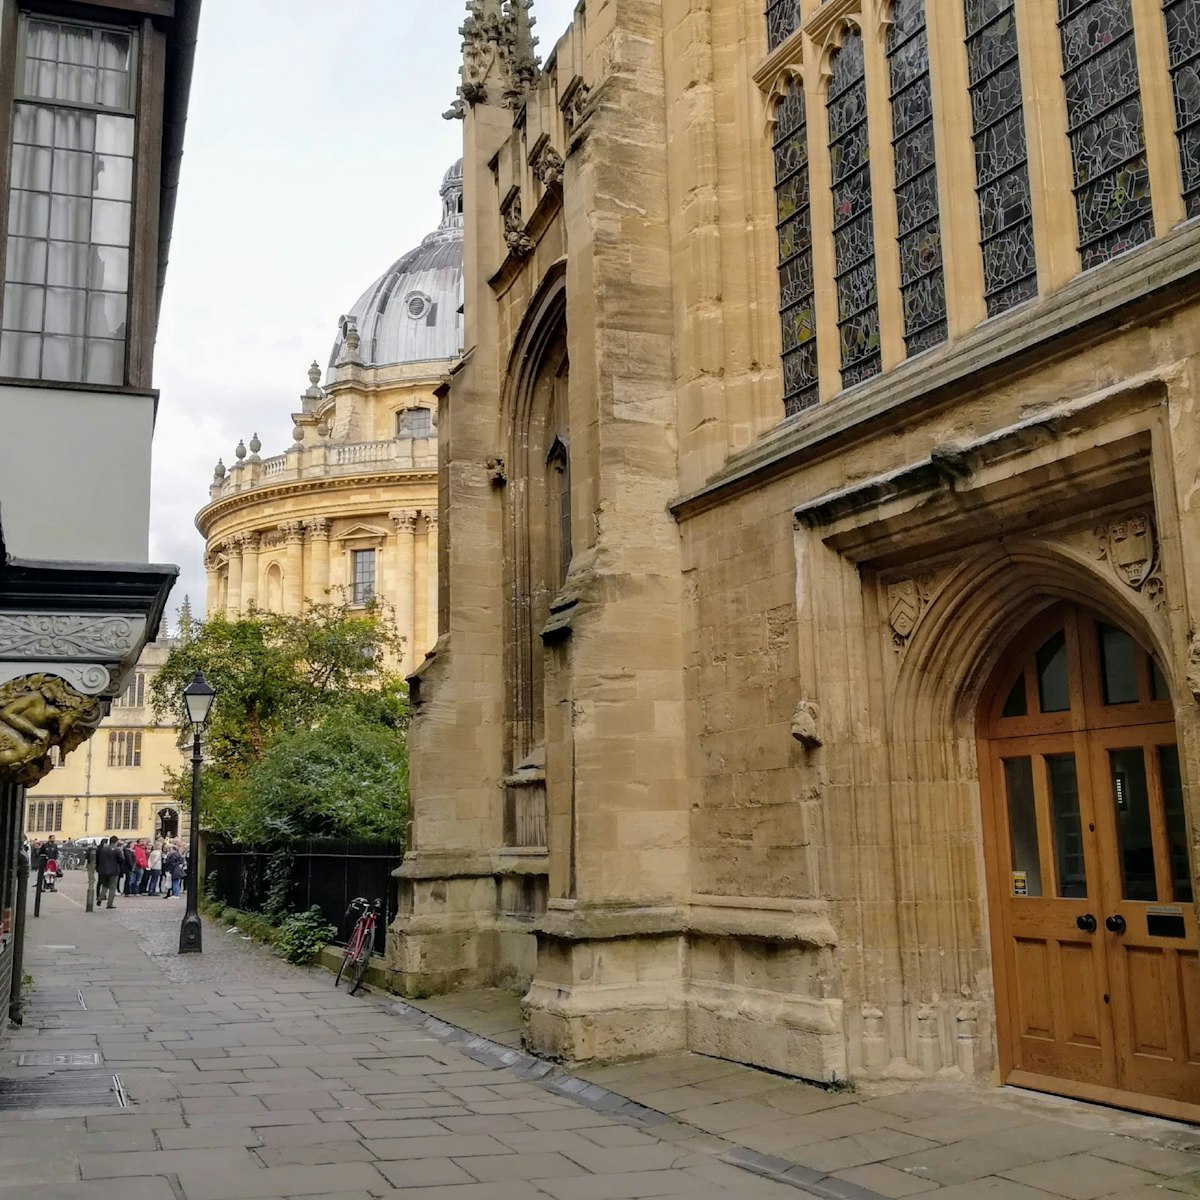 A side view of door in St Mary's Passage with the Radcliffe Camera in background.